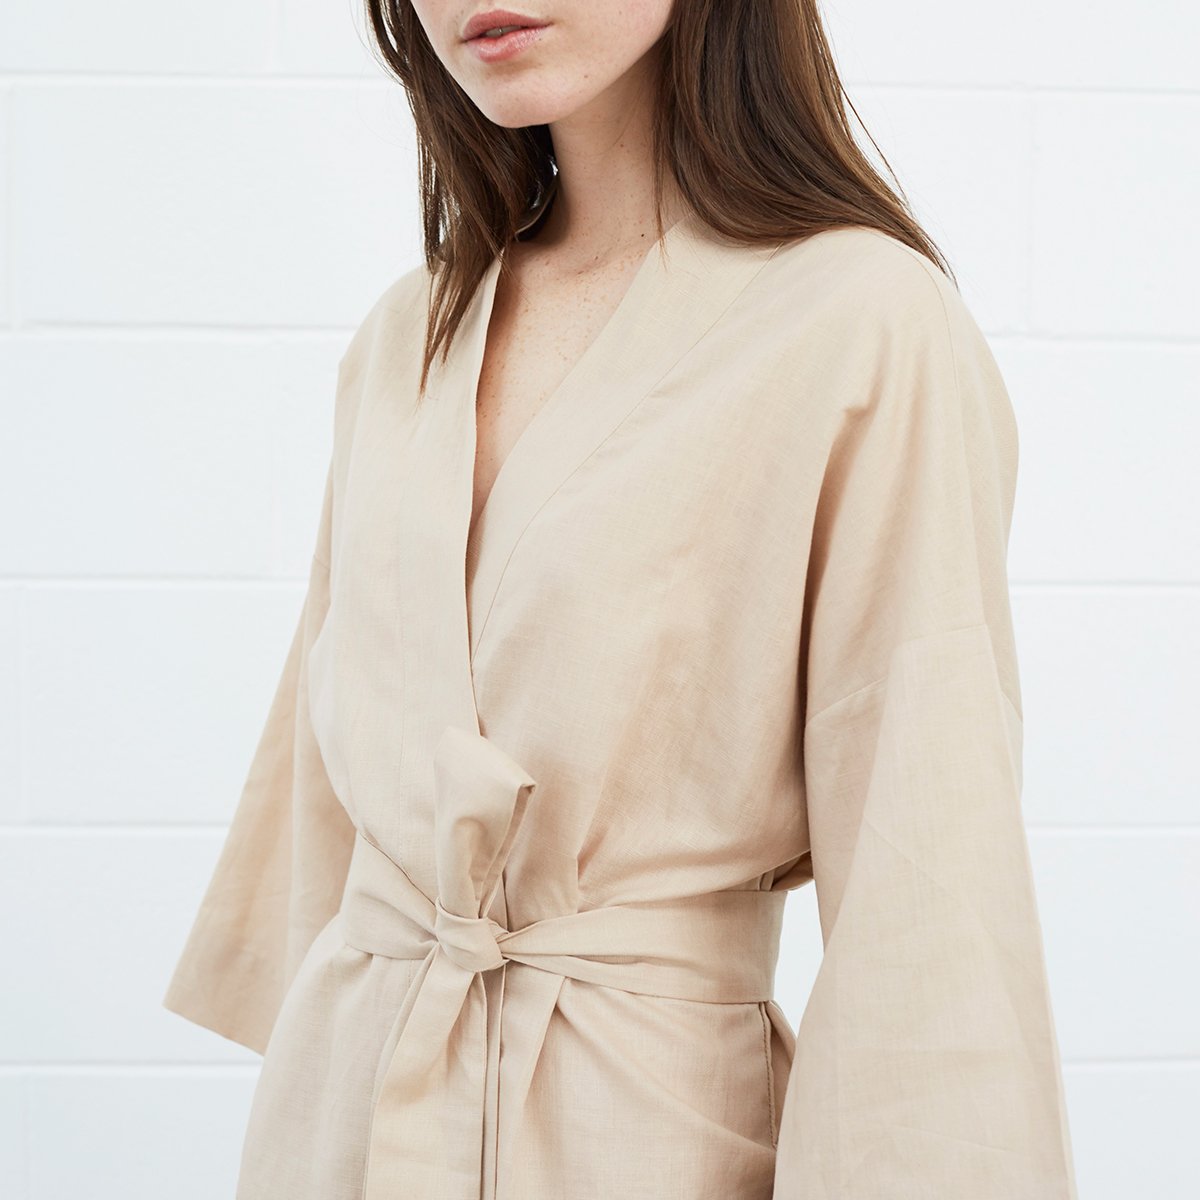 Close up of woman weaing beige robe